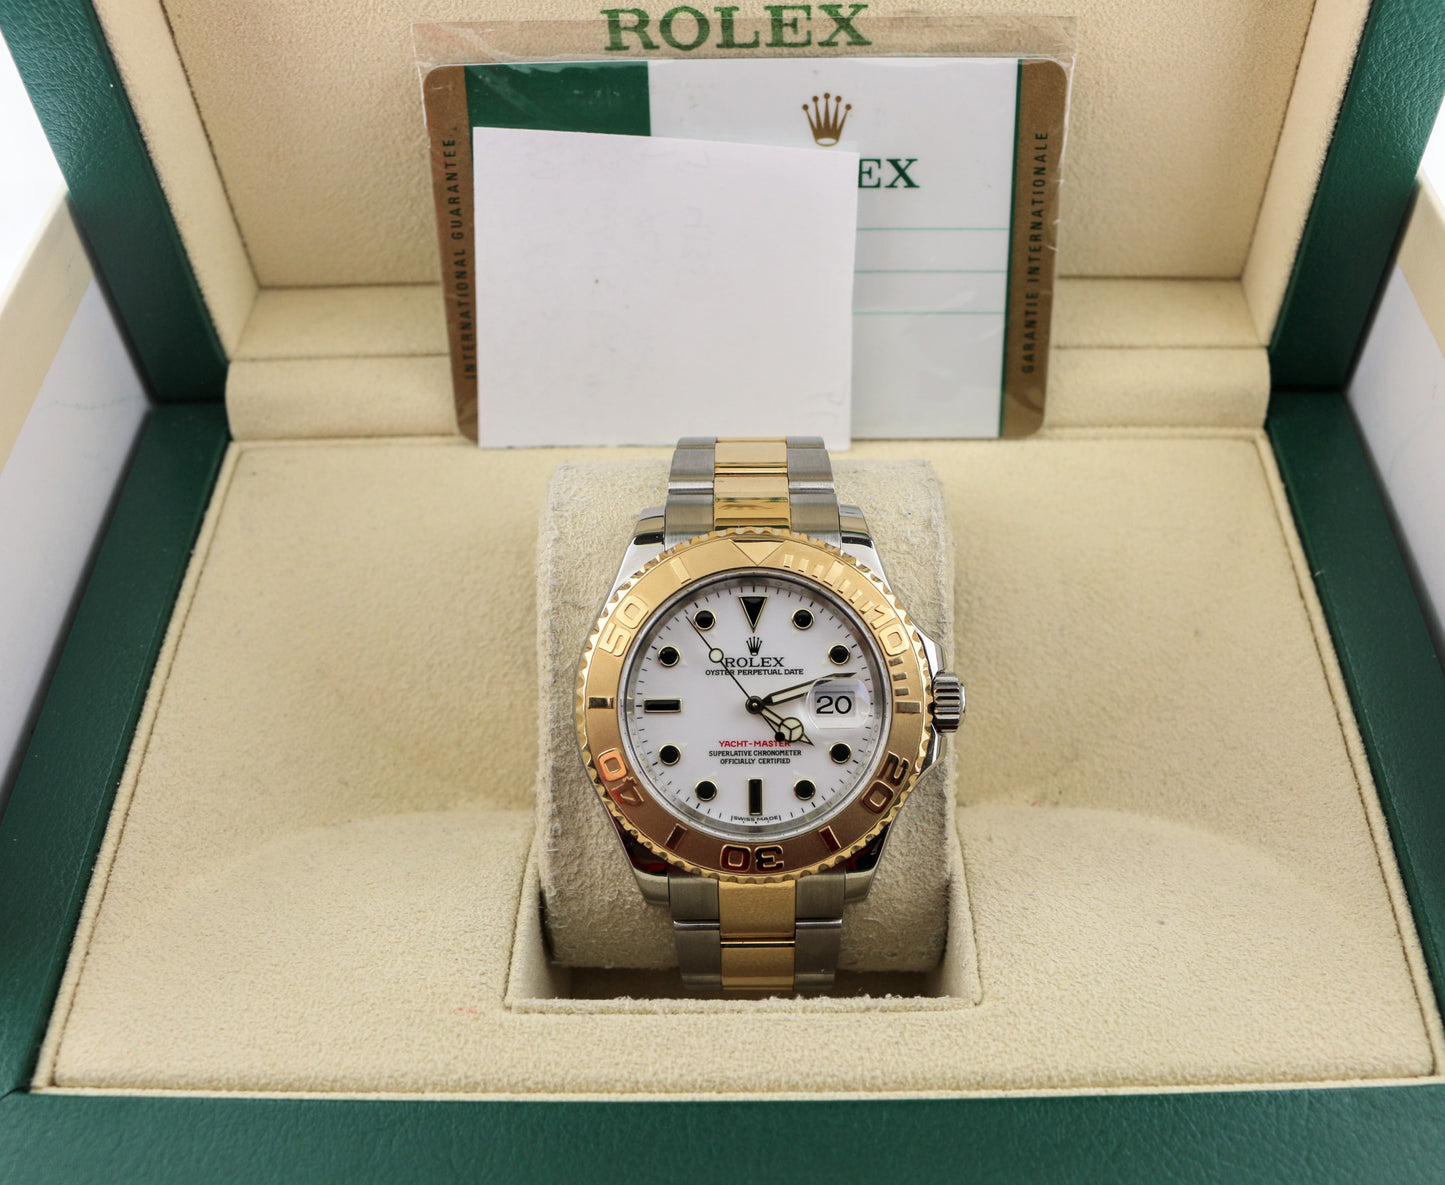 2015 Rolex Yacht-Master 16623 Scrambled Engrave White Dial TT Oyster Papers 40mm